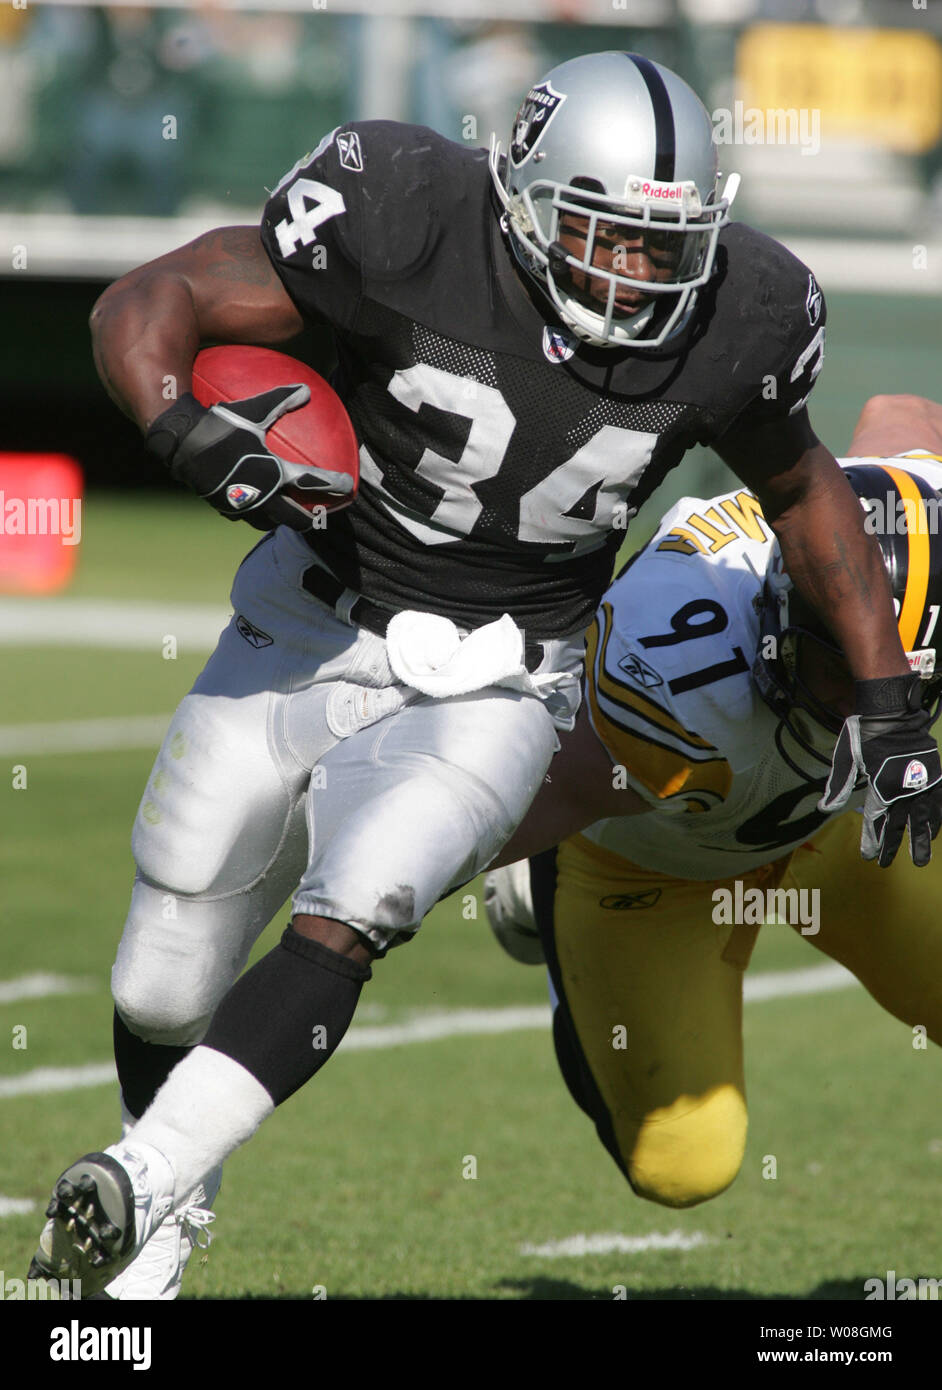 Oakland Raiders LaMont Jordan (34) eludes Pittsburgh Steelers Aaron Smith  (91) for a five yard gain in the second quarter at McAfee Coliseum in  Oakland, California on October 29, 2006. The Raiders